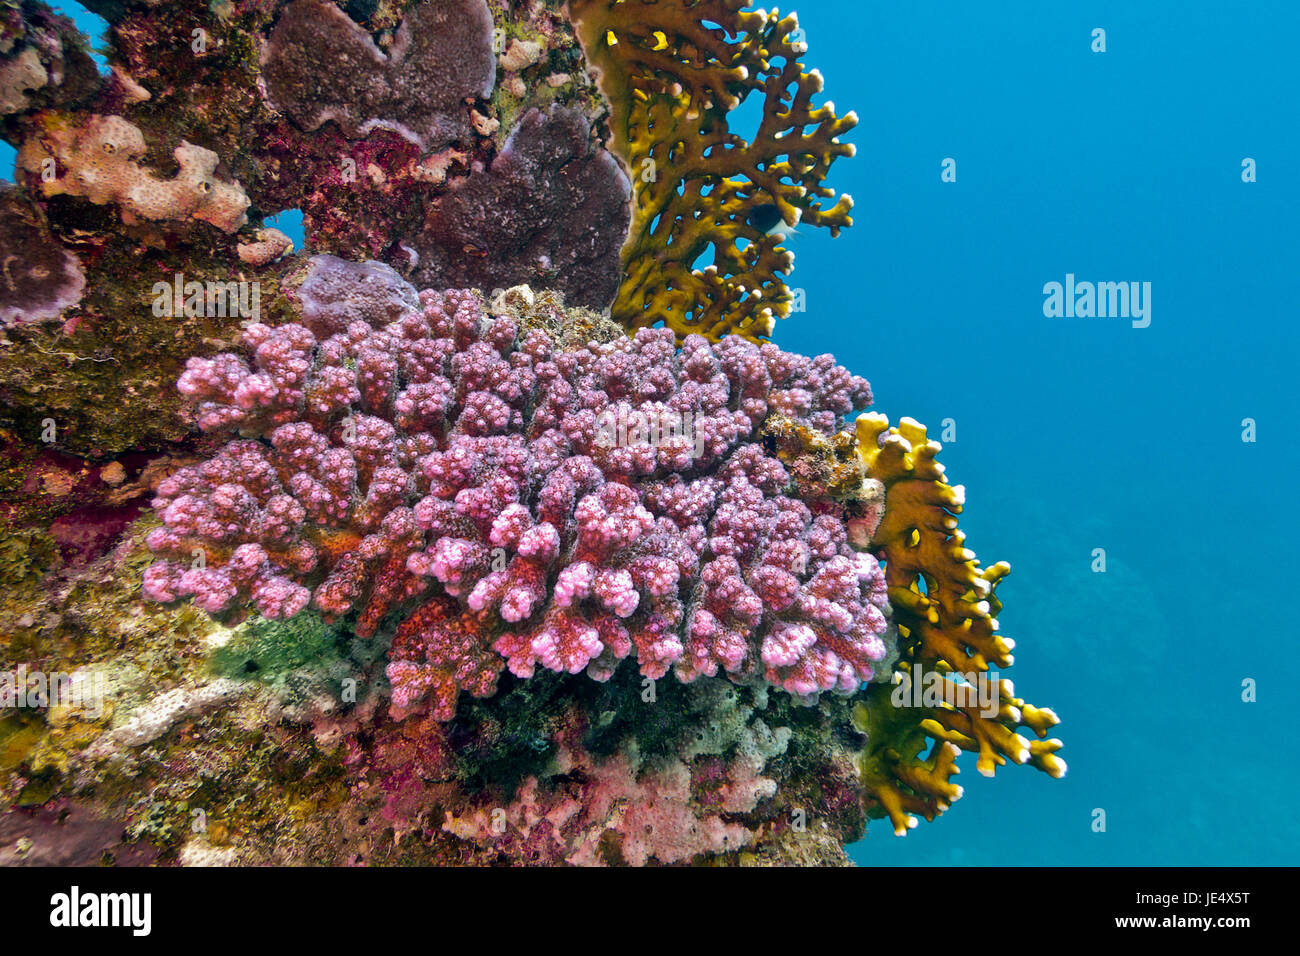 coral reef with violet stony coral at the bottom of tropical sea Stock Photo